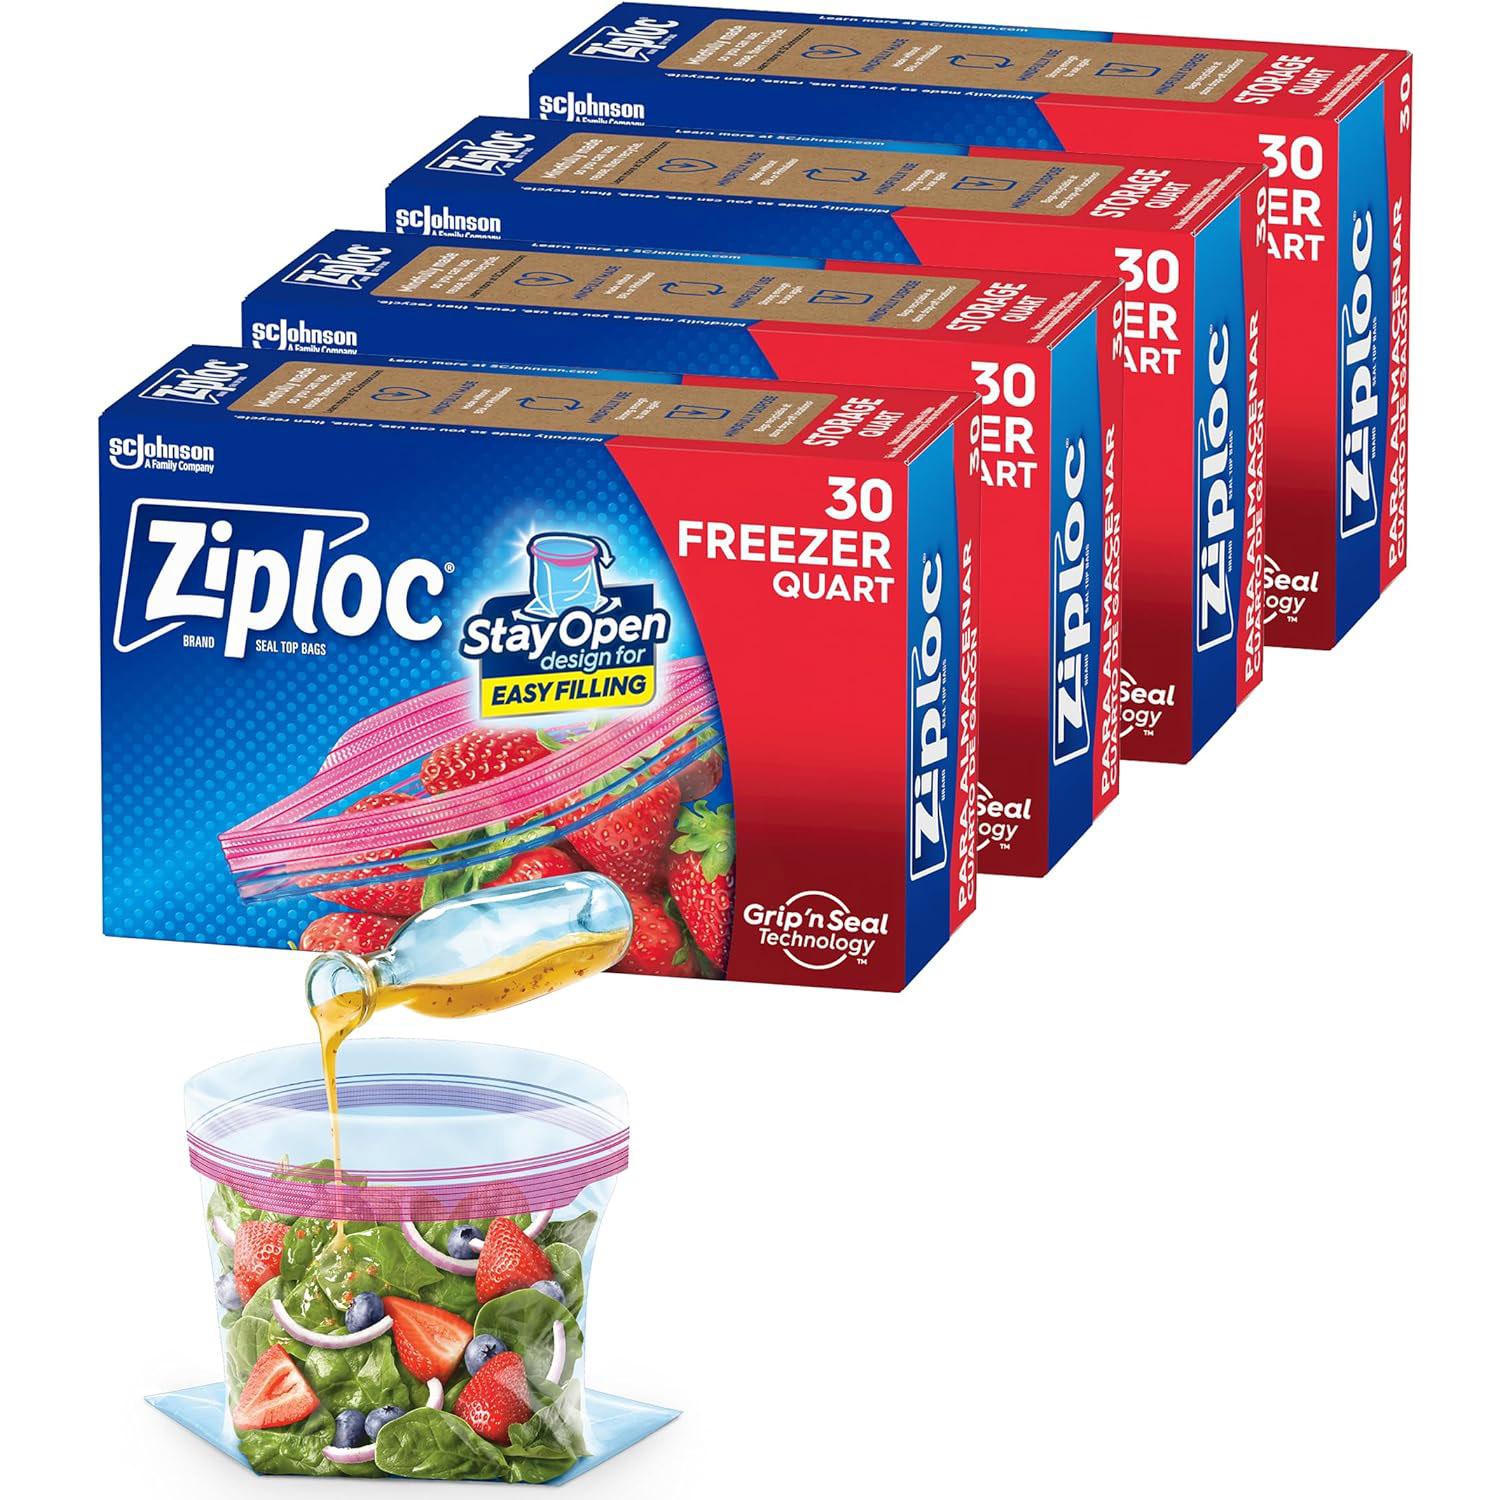 Ziploc Quart Food Storage Bags 30 Pack for $10.20 Shipped